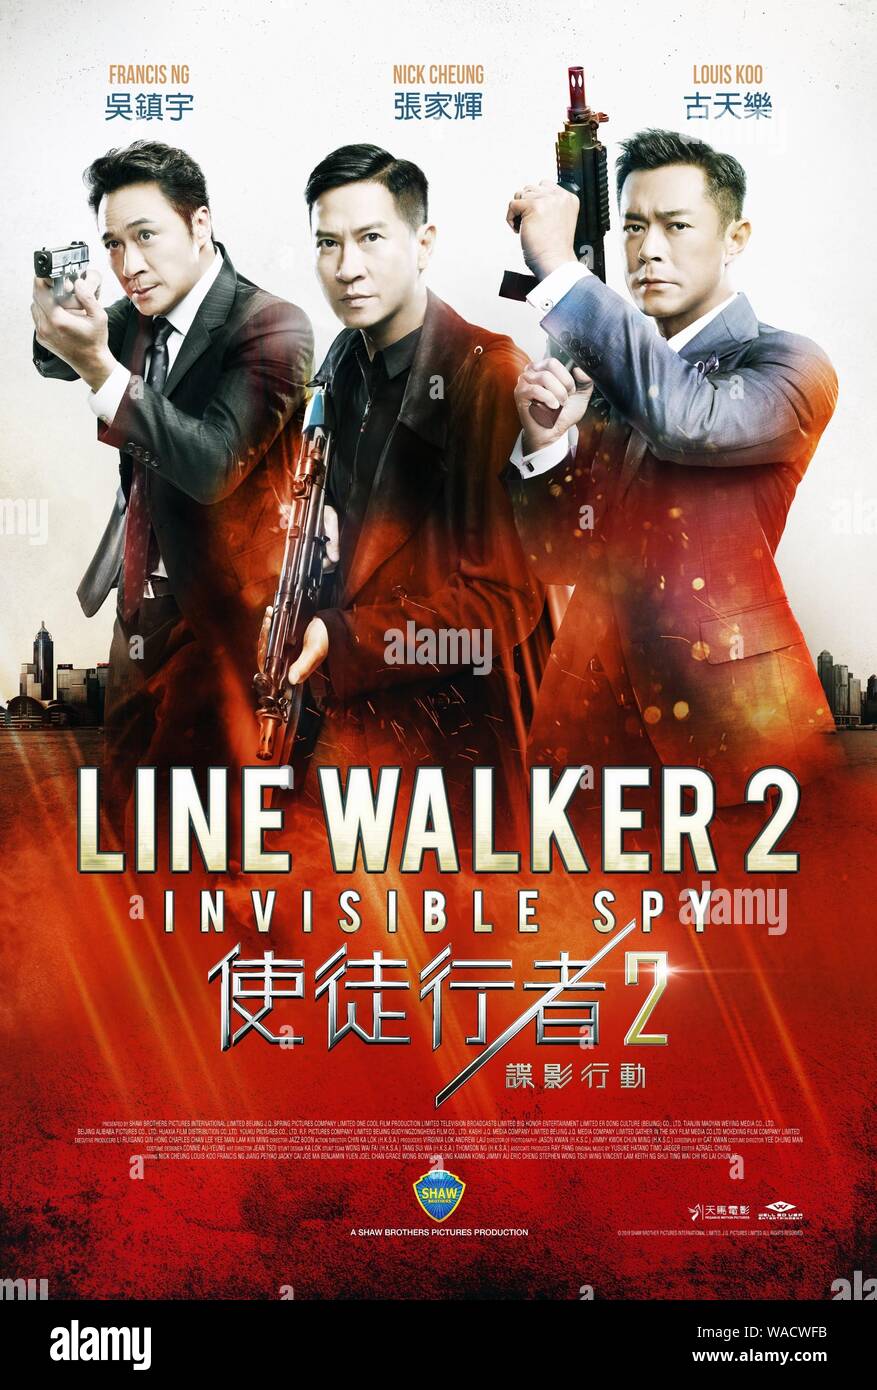 LINE WALKER 2, (aka LINE WALKER 2: INVISIBLE SPY, aka SHI TU XING ZHE 2:  DIE YING XING DONG), US poster, from left: Francis NG, Nick CHEUNG, Louis  KOO, 2019. © Well